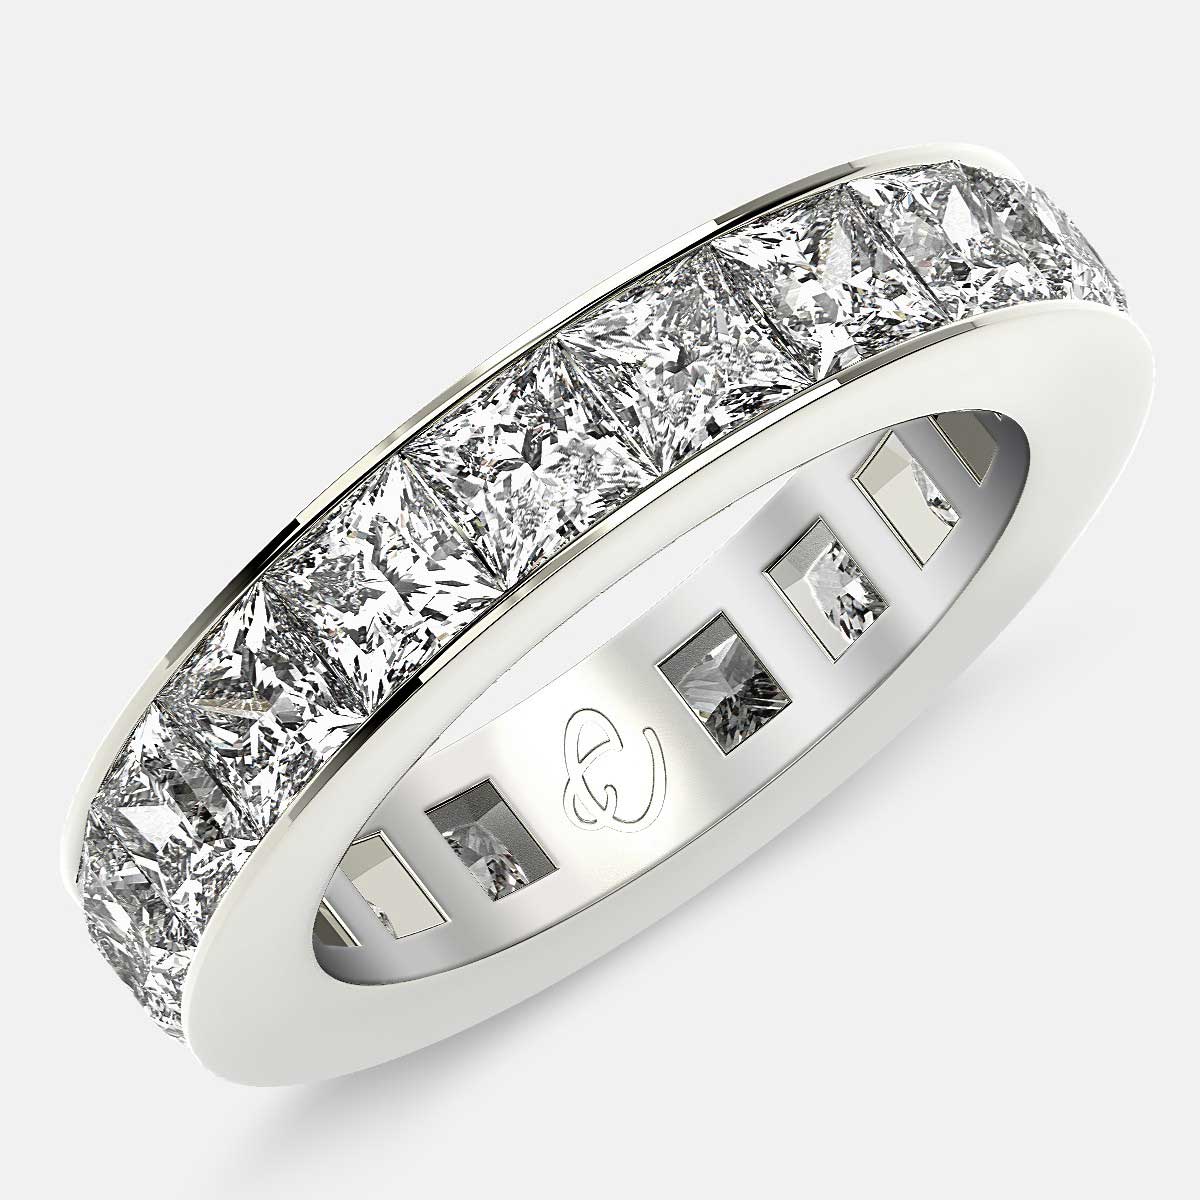 Eternity Ring with Channel Set Princess Cut Diamonds in 18k White Gold